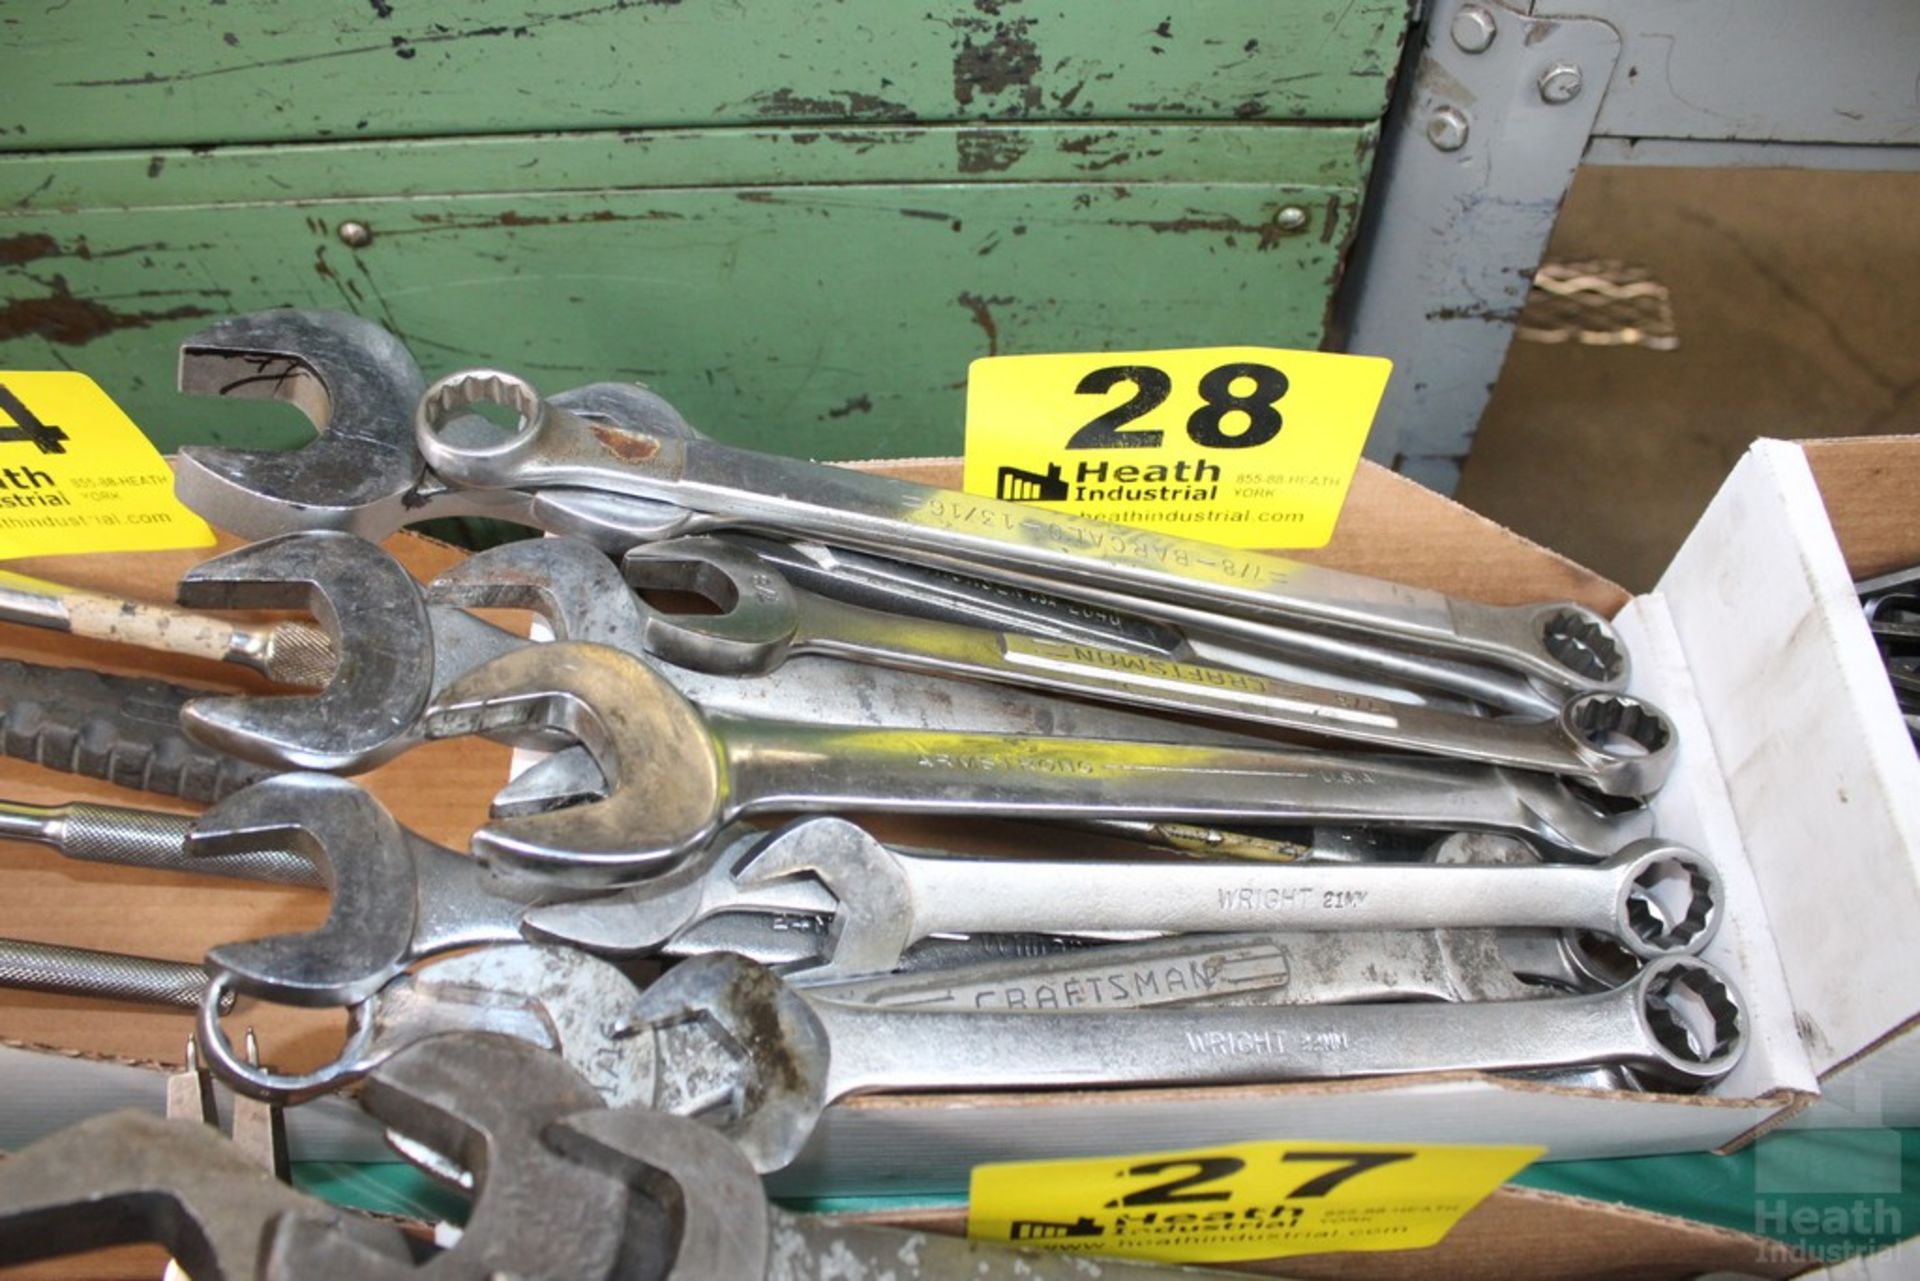 ASSORTED COMBINATION WRENCHES